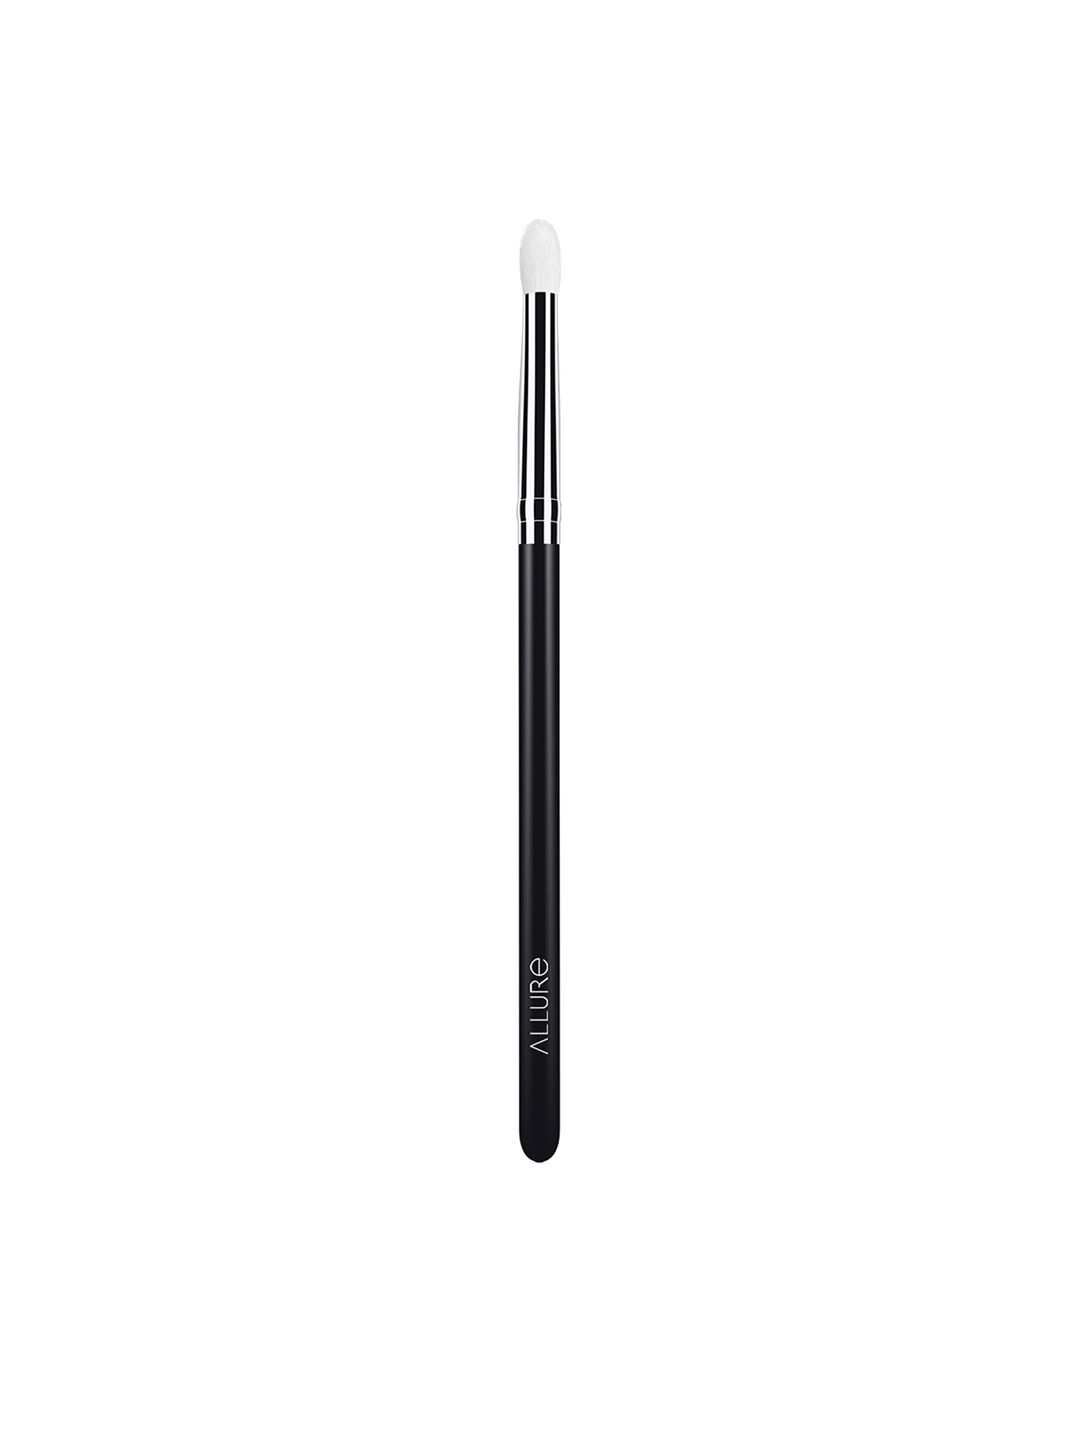 ALLURE Professional Eye Pencil Makeup Brush - 230s Price in India